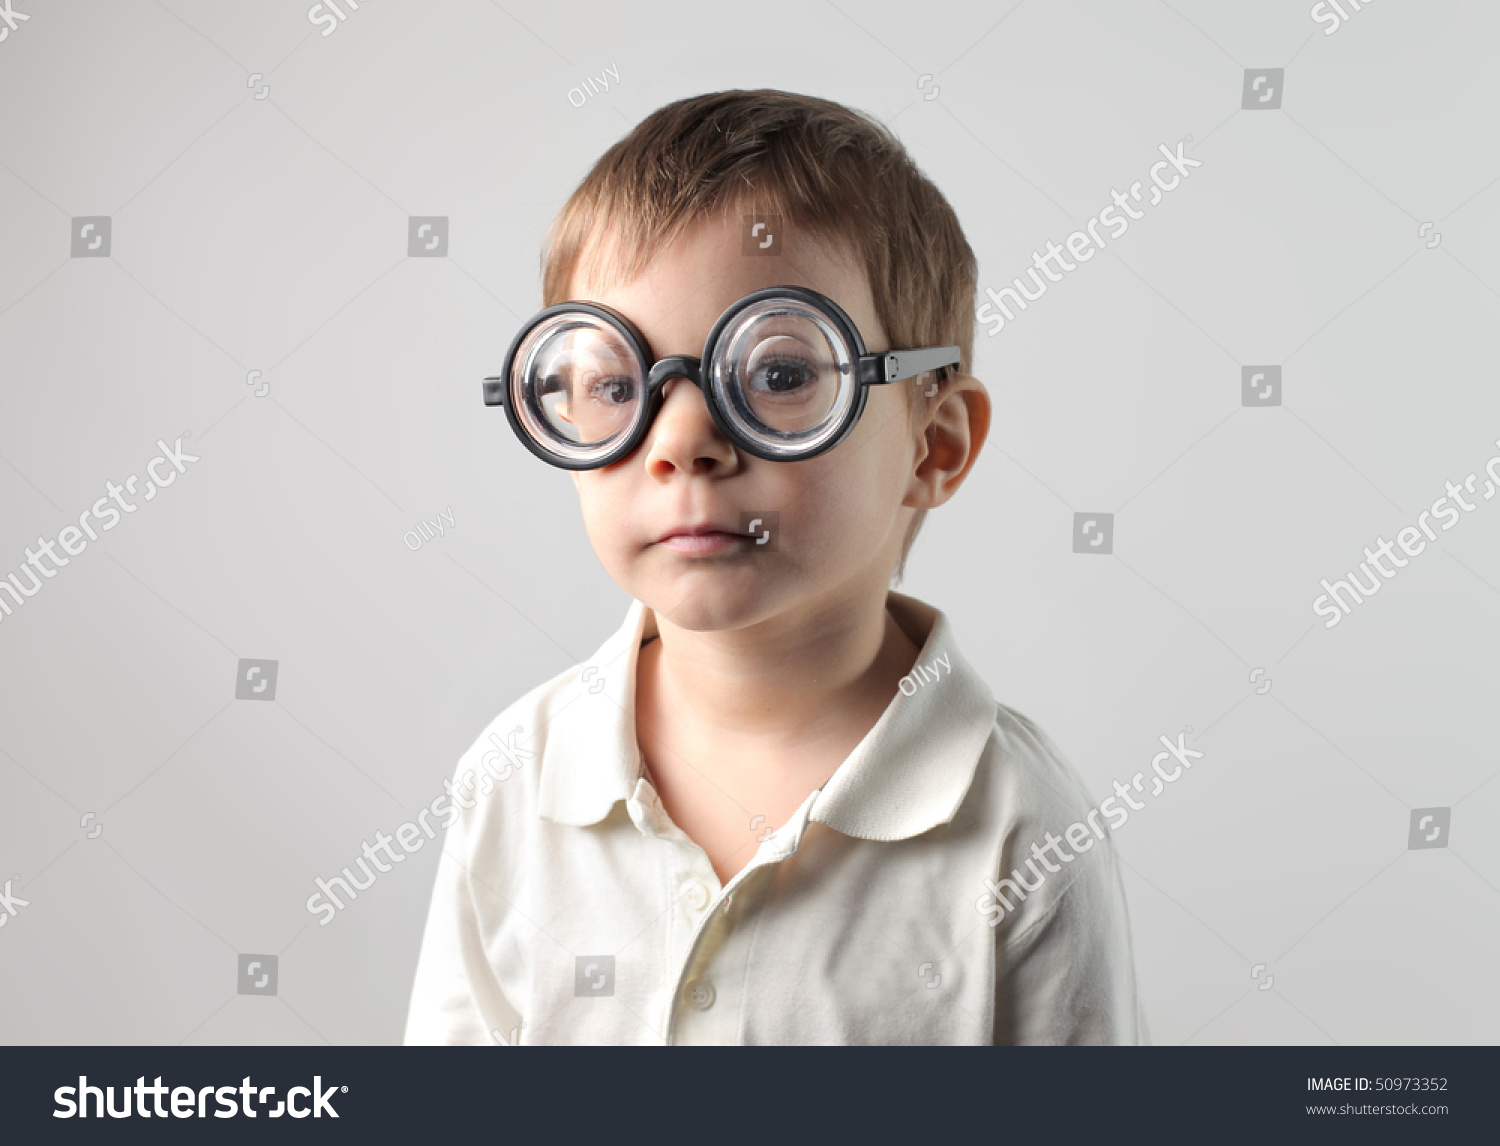 Child With Thick Glasses Stock Photo 50973352 : Shutterstock People With Thick Glasses